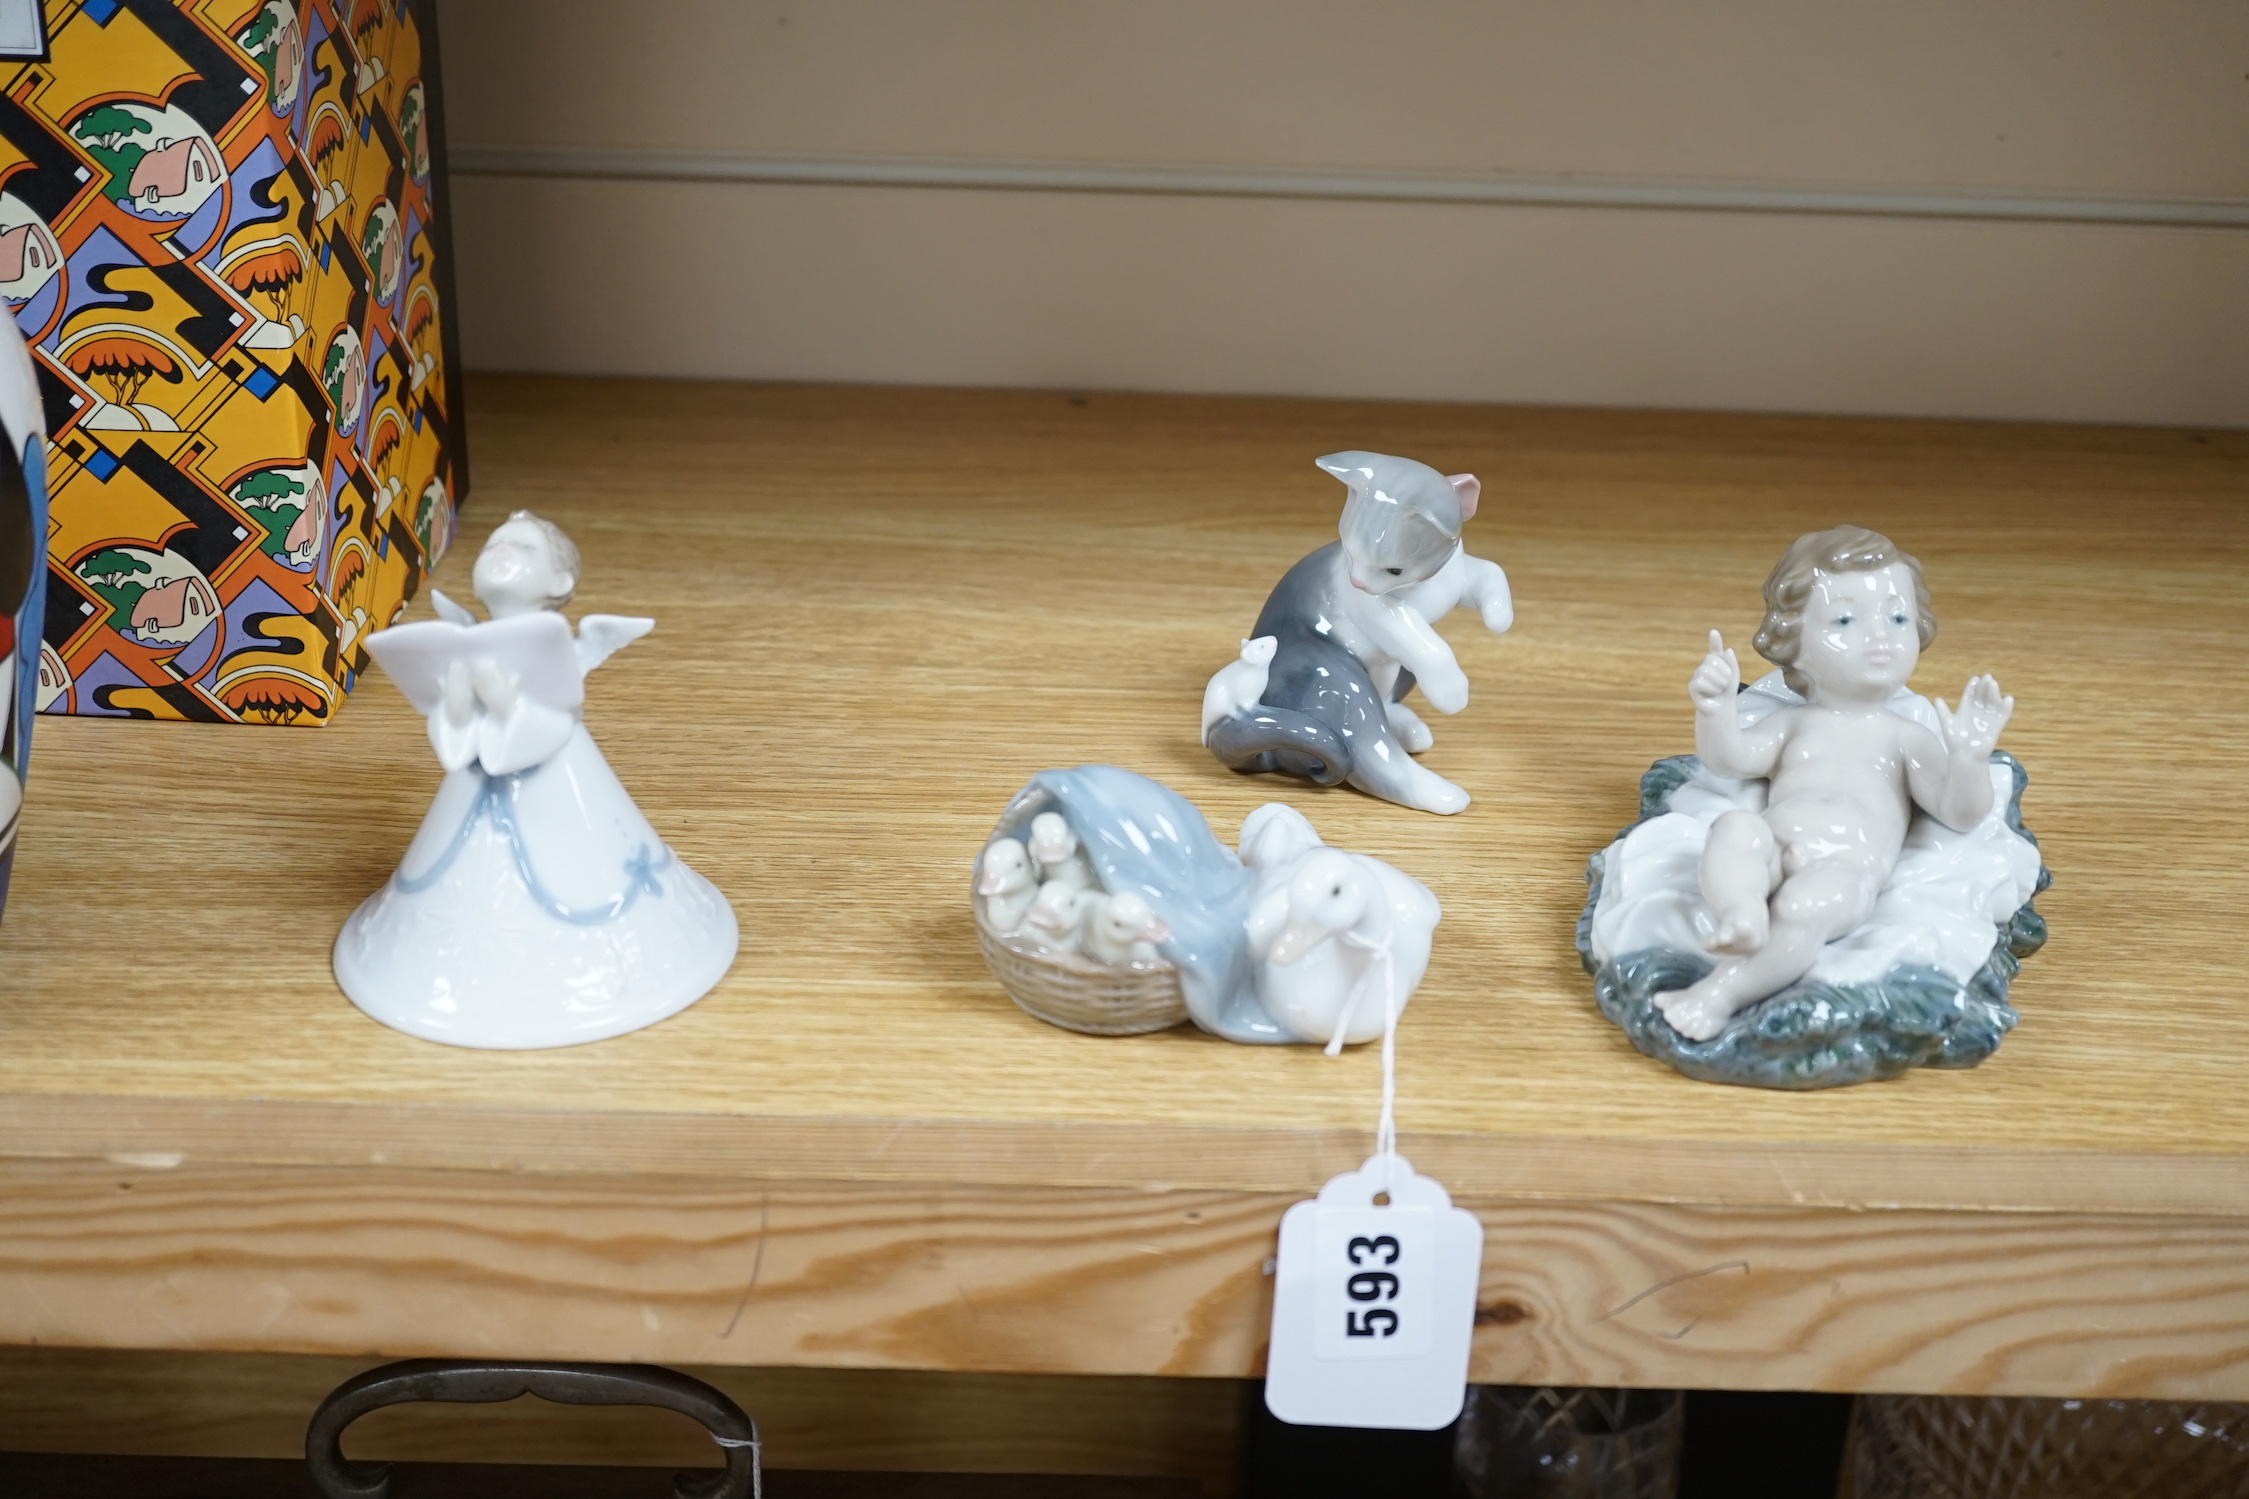 A large Lladro figure group “La gran familia, Puppy Brigade”, Baby Jesus, Duckling, New Friend, Chit-Chat, Sunday’s Child, Little Sister, Cat and Mouse and heavenly Tenor (9), largest 30 cm wide